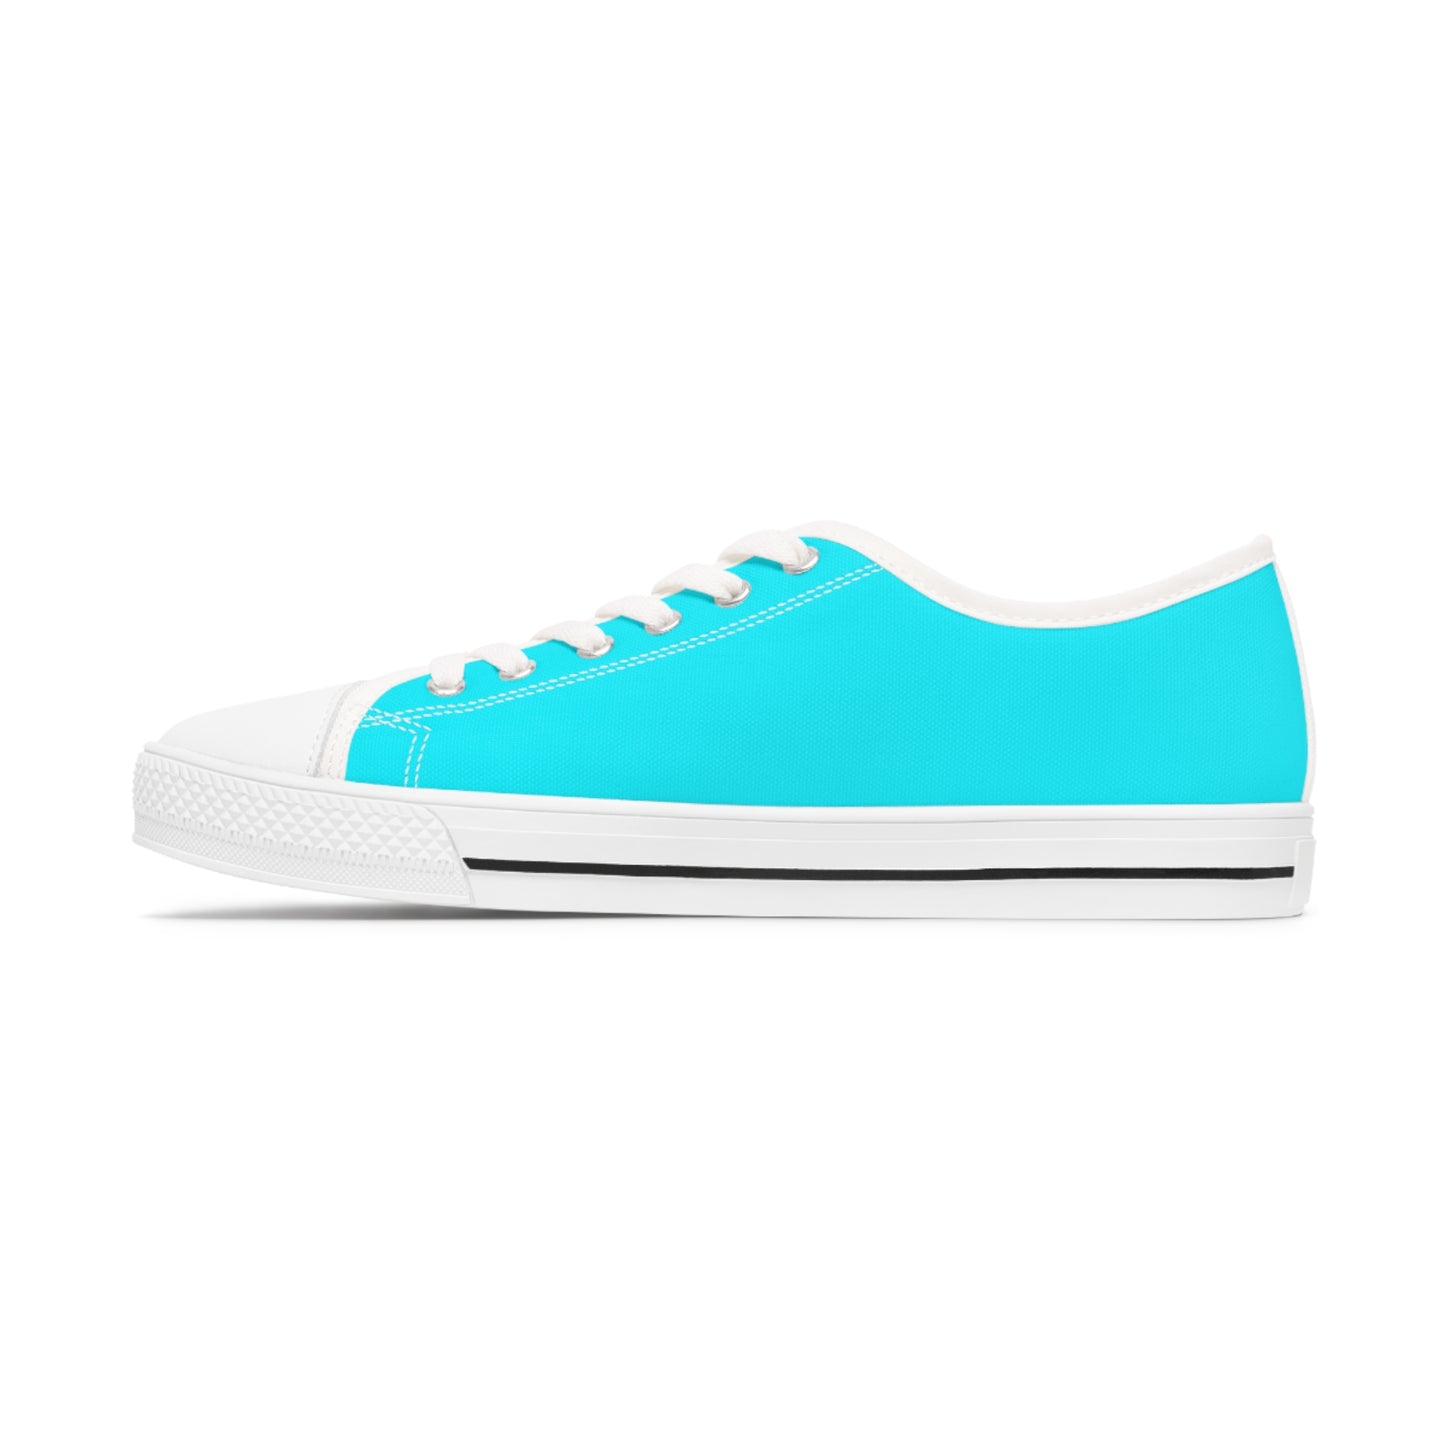 Women's Canvas Low Top Solid Color Sneakers - Cool Pool Aqua Blue US 12 White sole